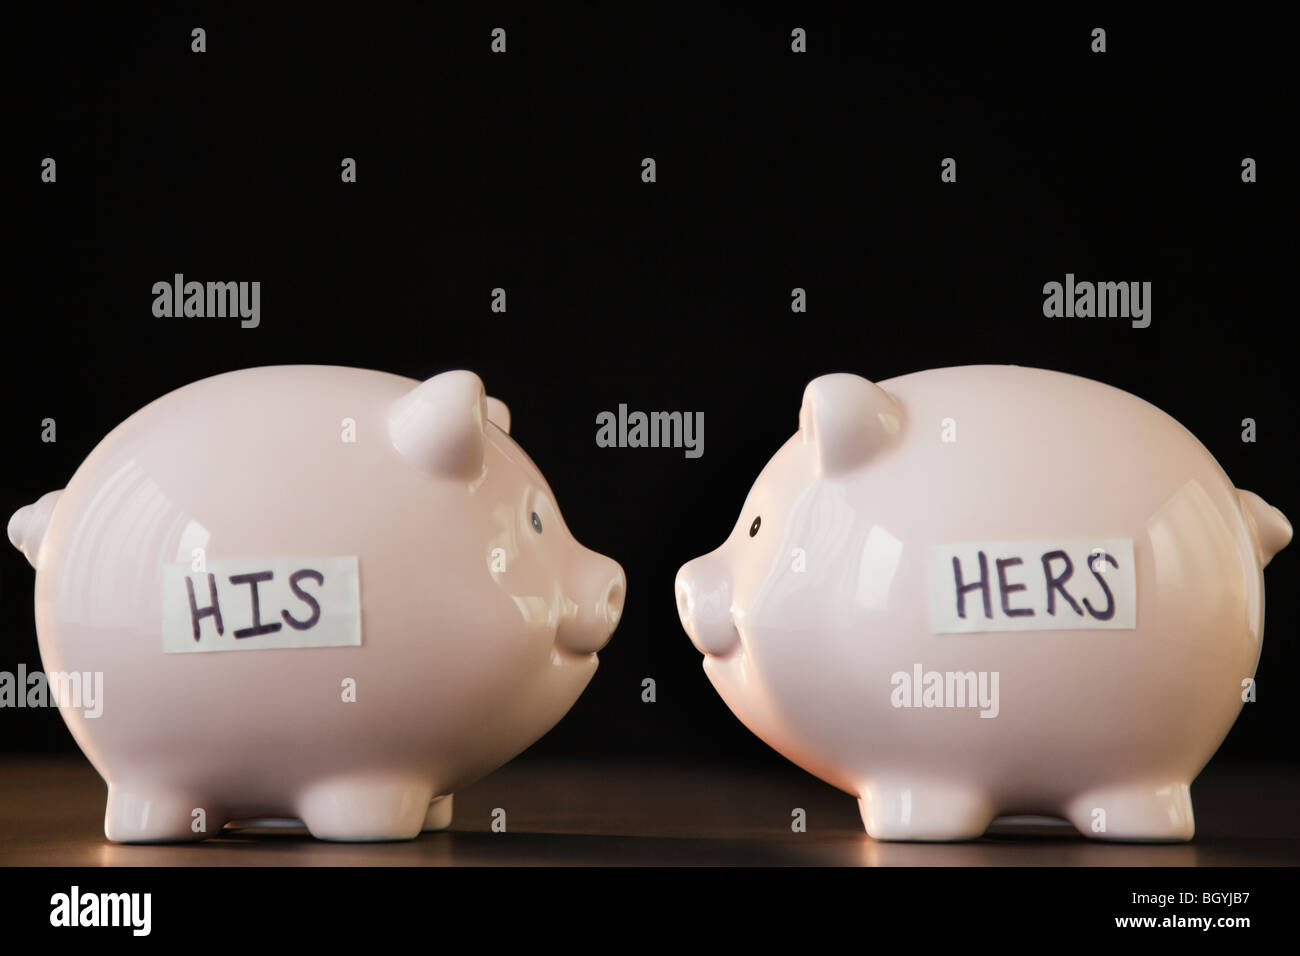 His and hers piggy banks Stock Photo